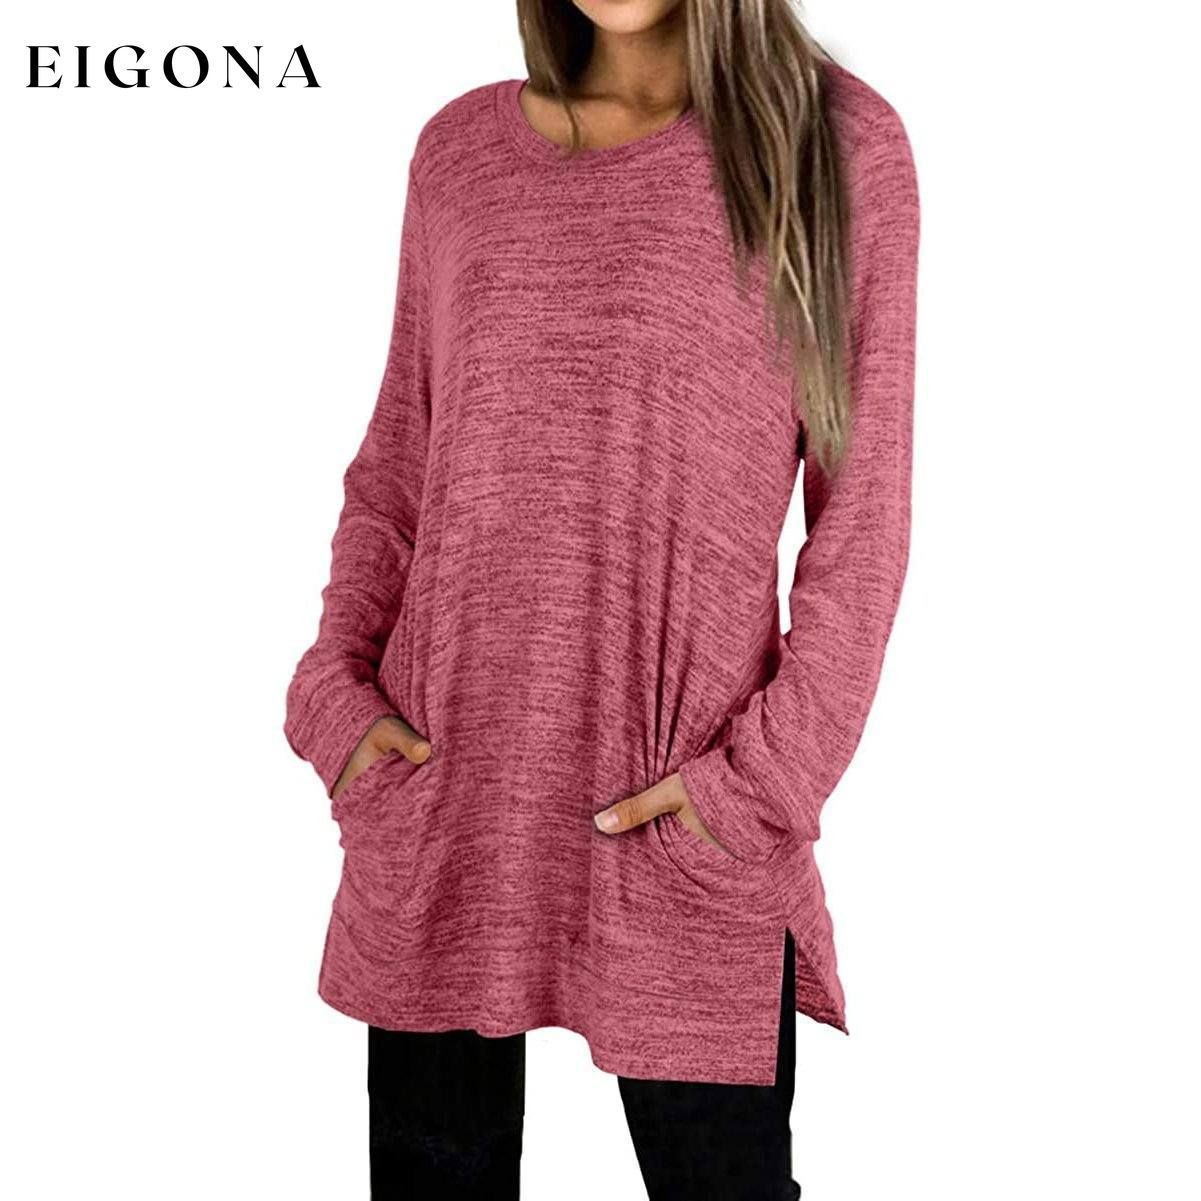 Women's Casual Sweatshirts Long Sleeve Oversized Shirt Red __stock:50 clothes refund_fee:1200 tops